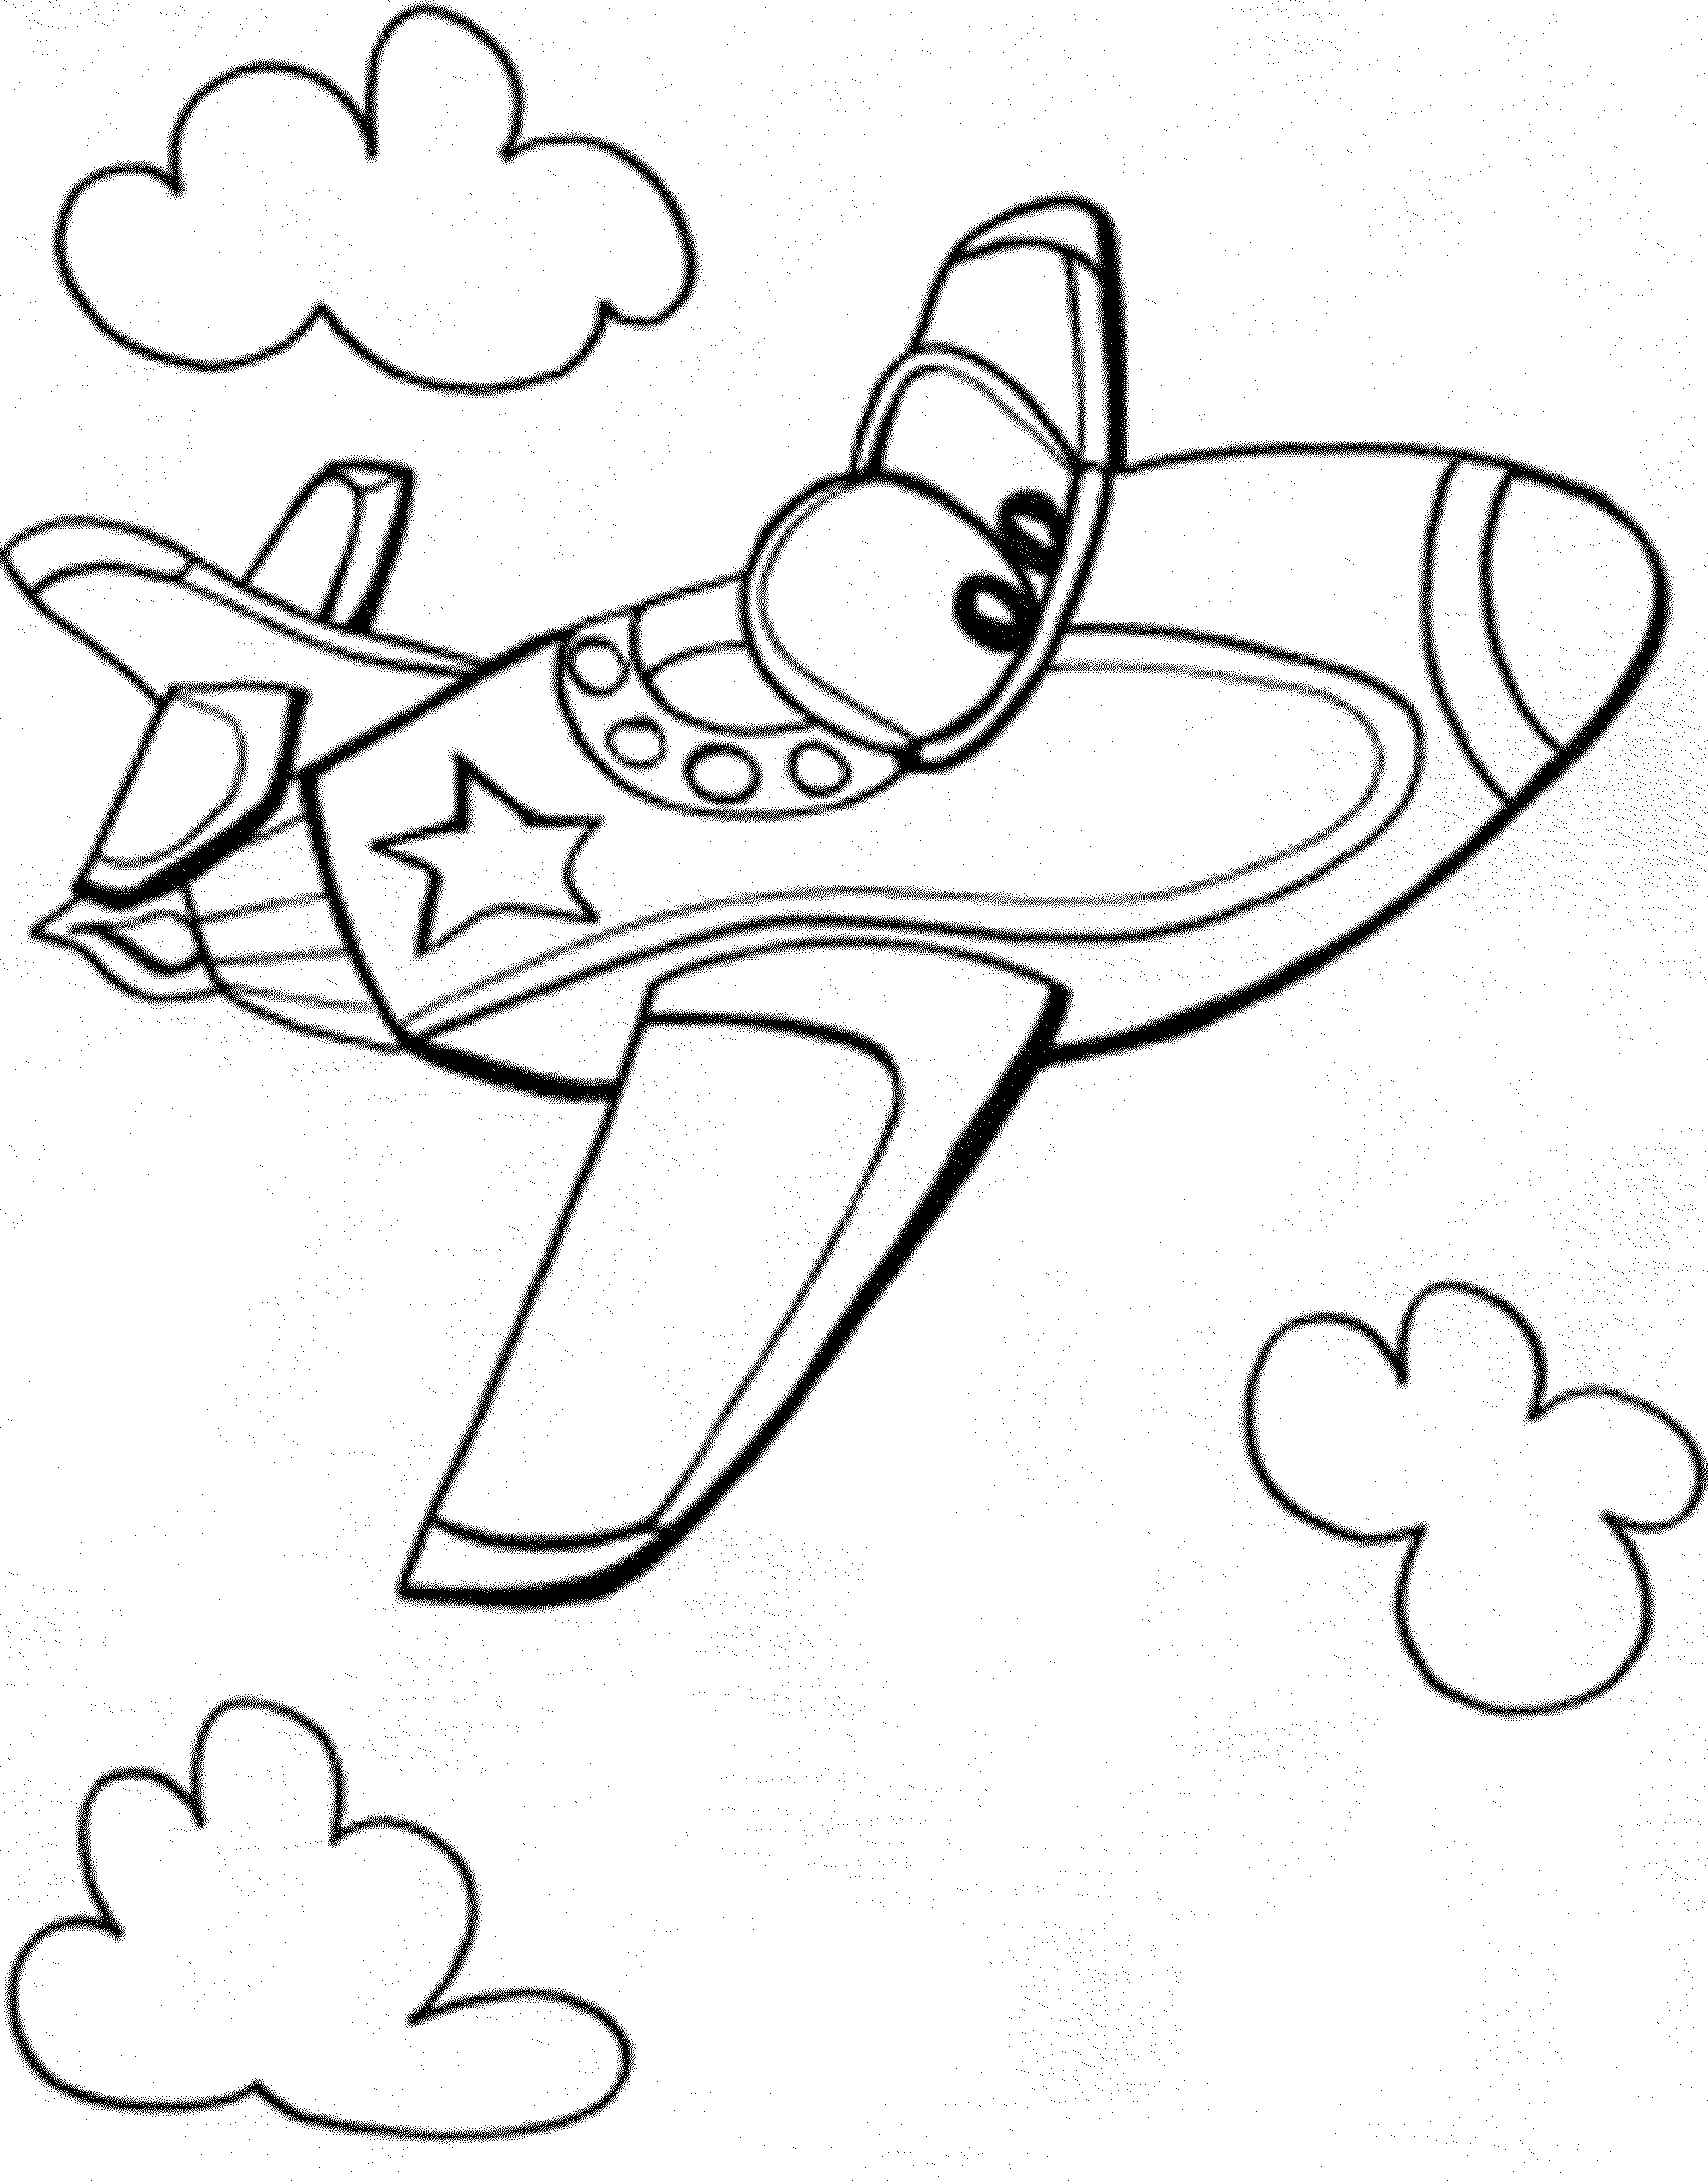 Nice Air Plane Coloring Page